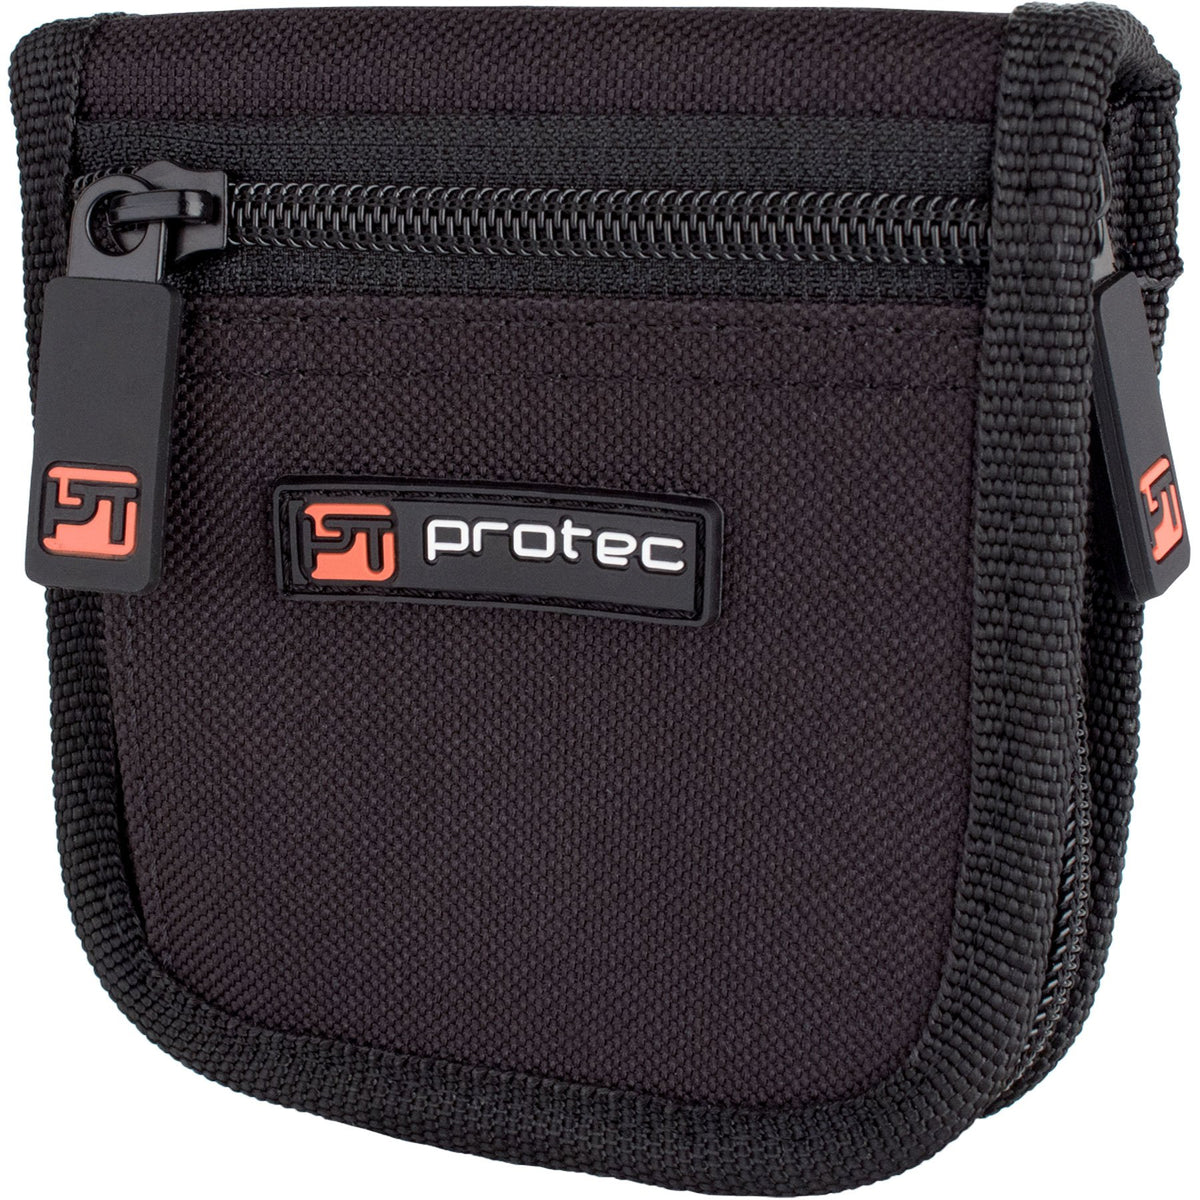 Protec - Small Brass (Trumpet) 2-Piece Nylon Mouthpiece Pouch with Zipper Closure-Accessories-Protec-Music Elements